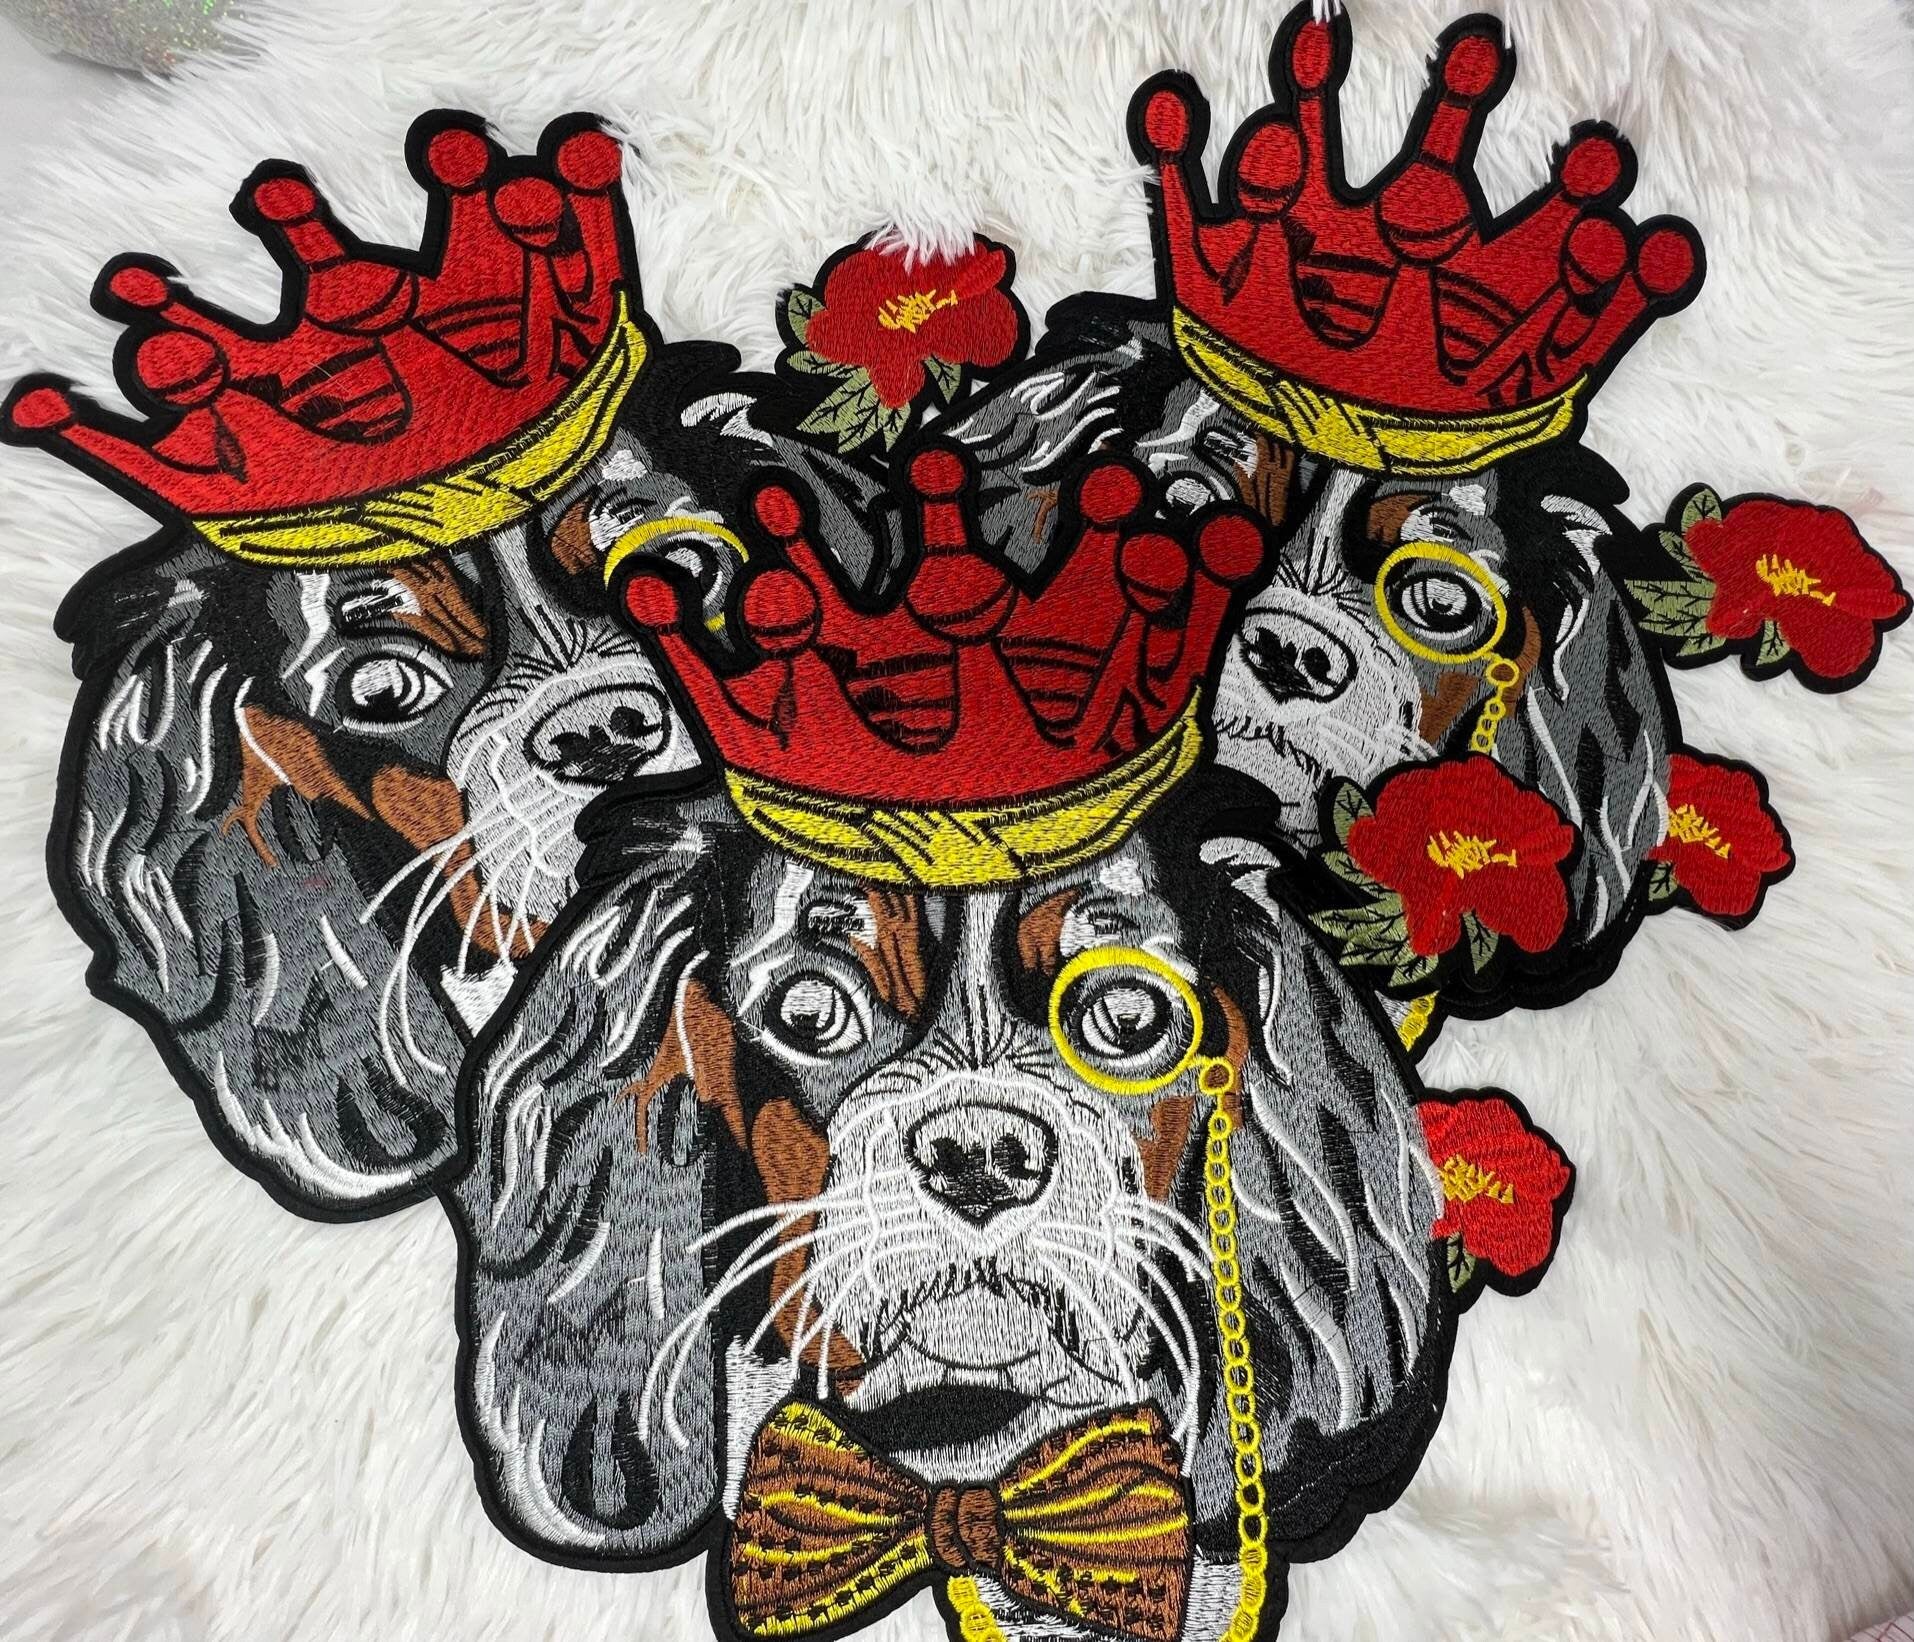 Exclusive, "Royal Crown Doggie" Large Embroidered Patch, Iron-on Applique, Patch for Men and Dog Lovers, 12" Back Patch for Jackets, Hoodies